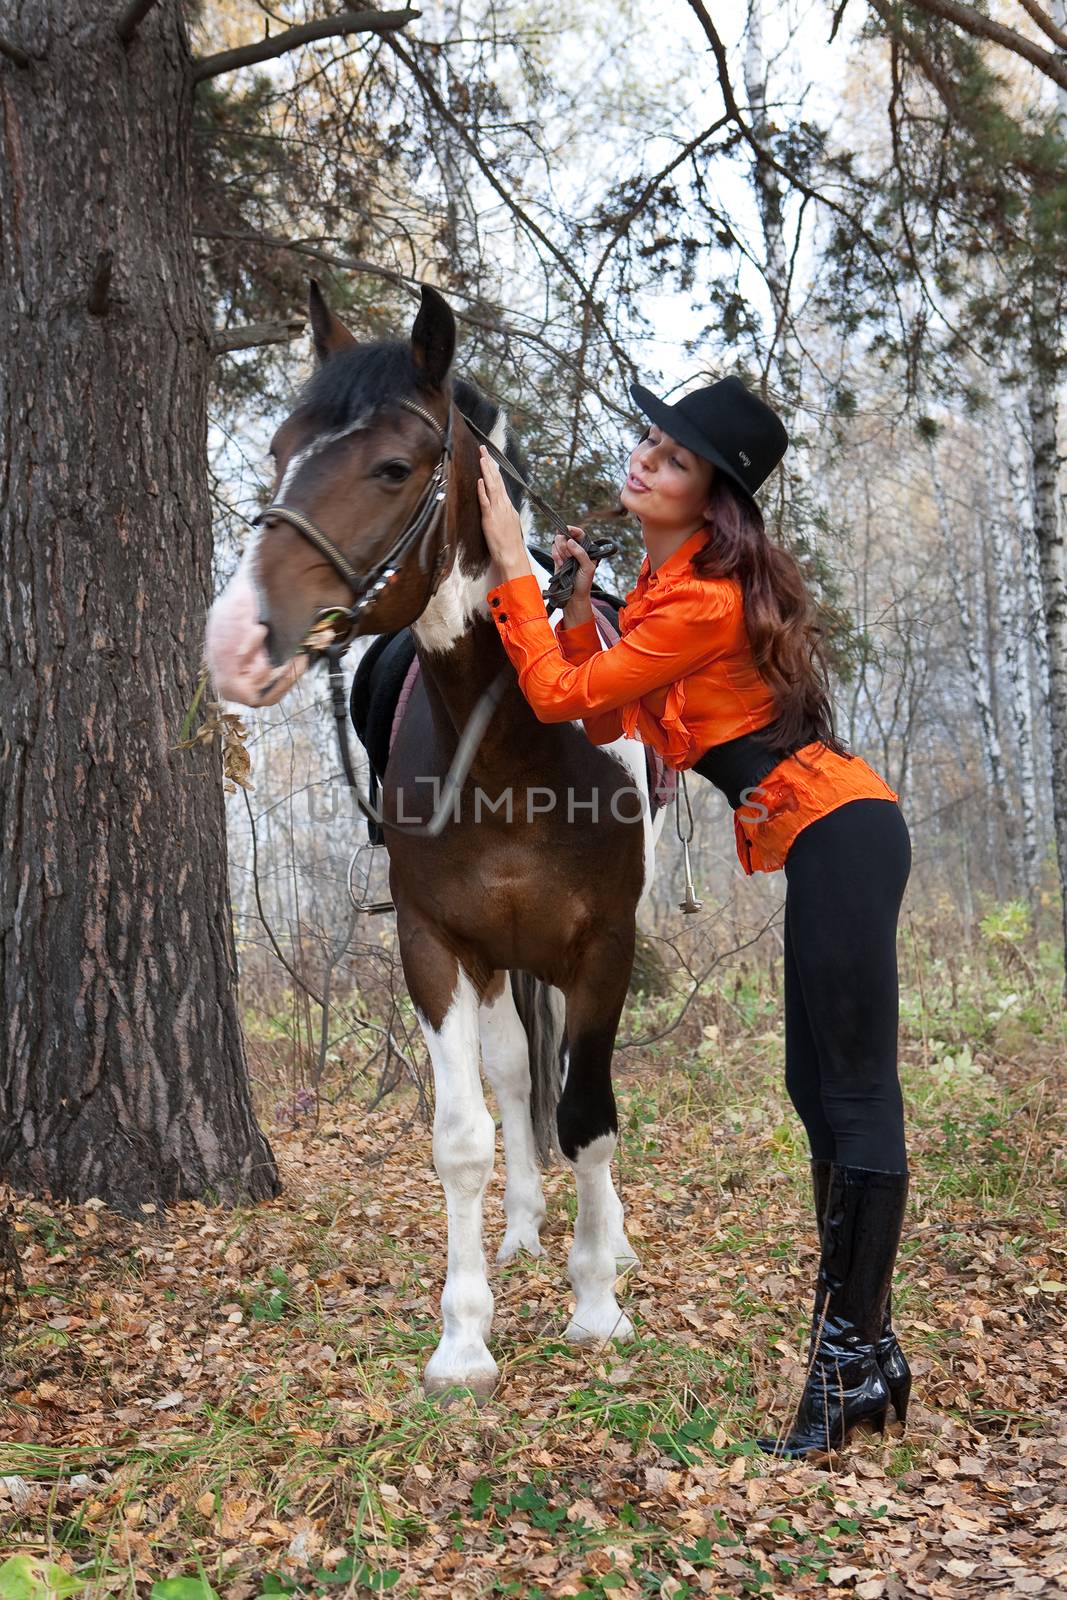 Young woman and horse in a forest